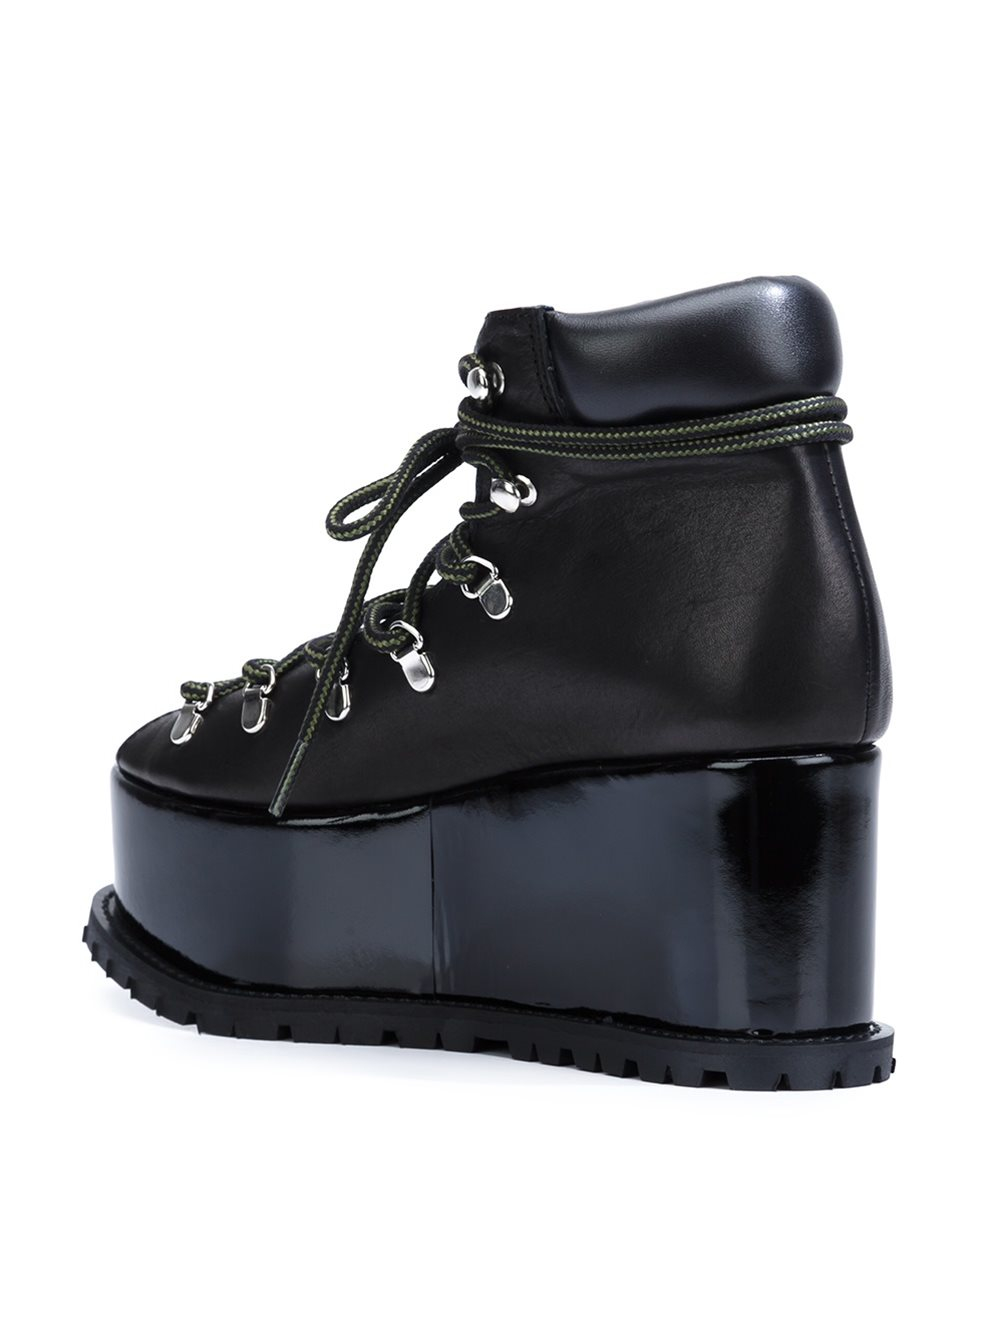 Sacai Leather Platform Hiking Boots in Black - Lyst